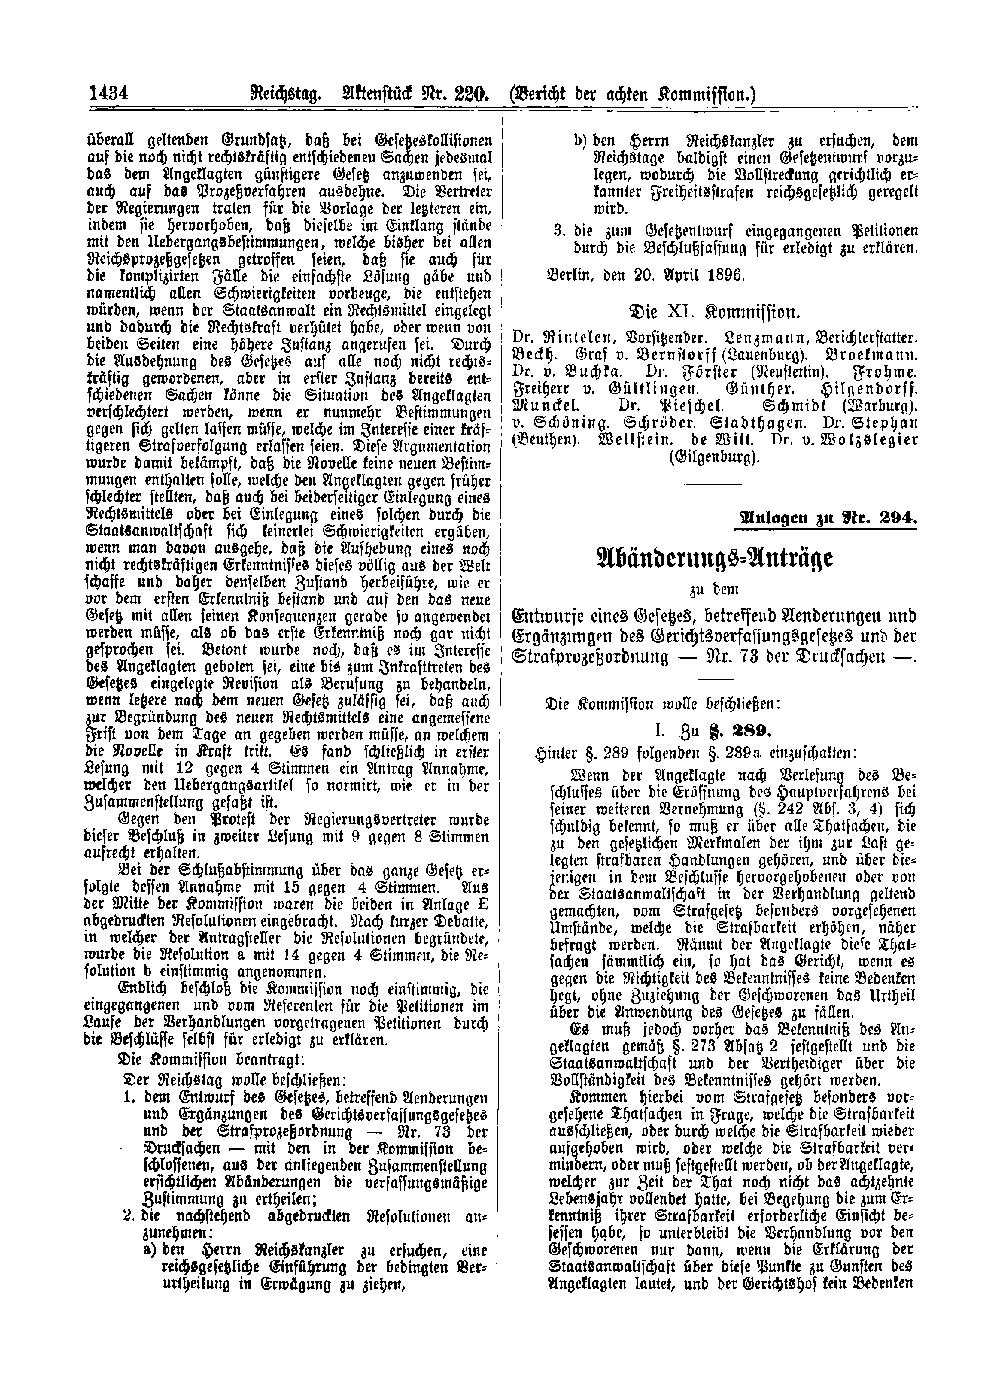 Scan of page 1434